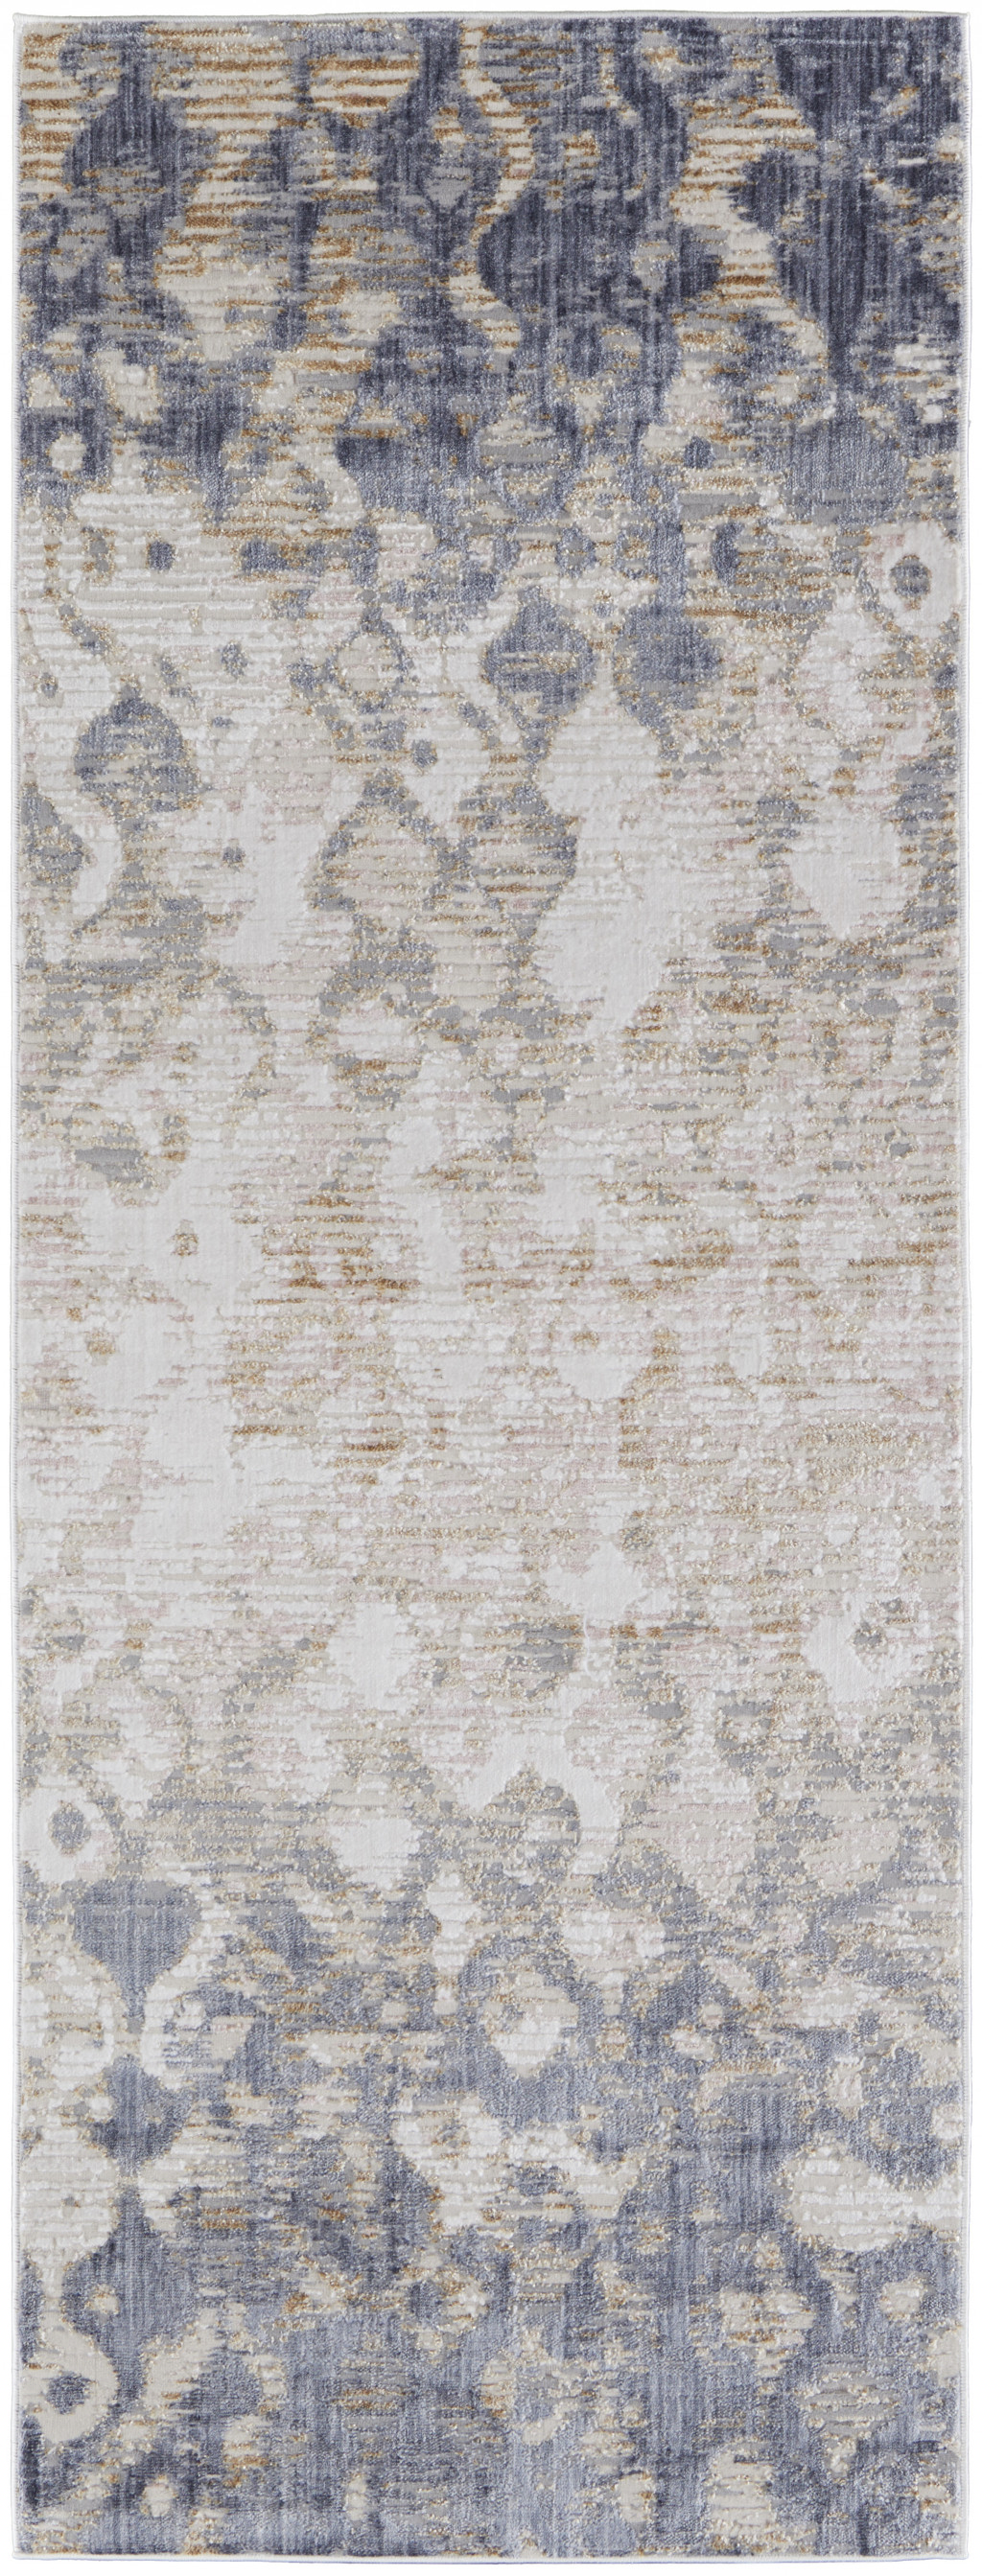 12' Tan Ivory And Blue Abstract Power Loom Distressed Runner Rug-514164-1